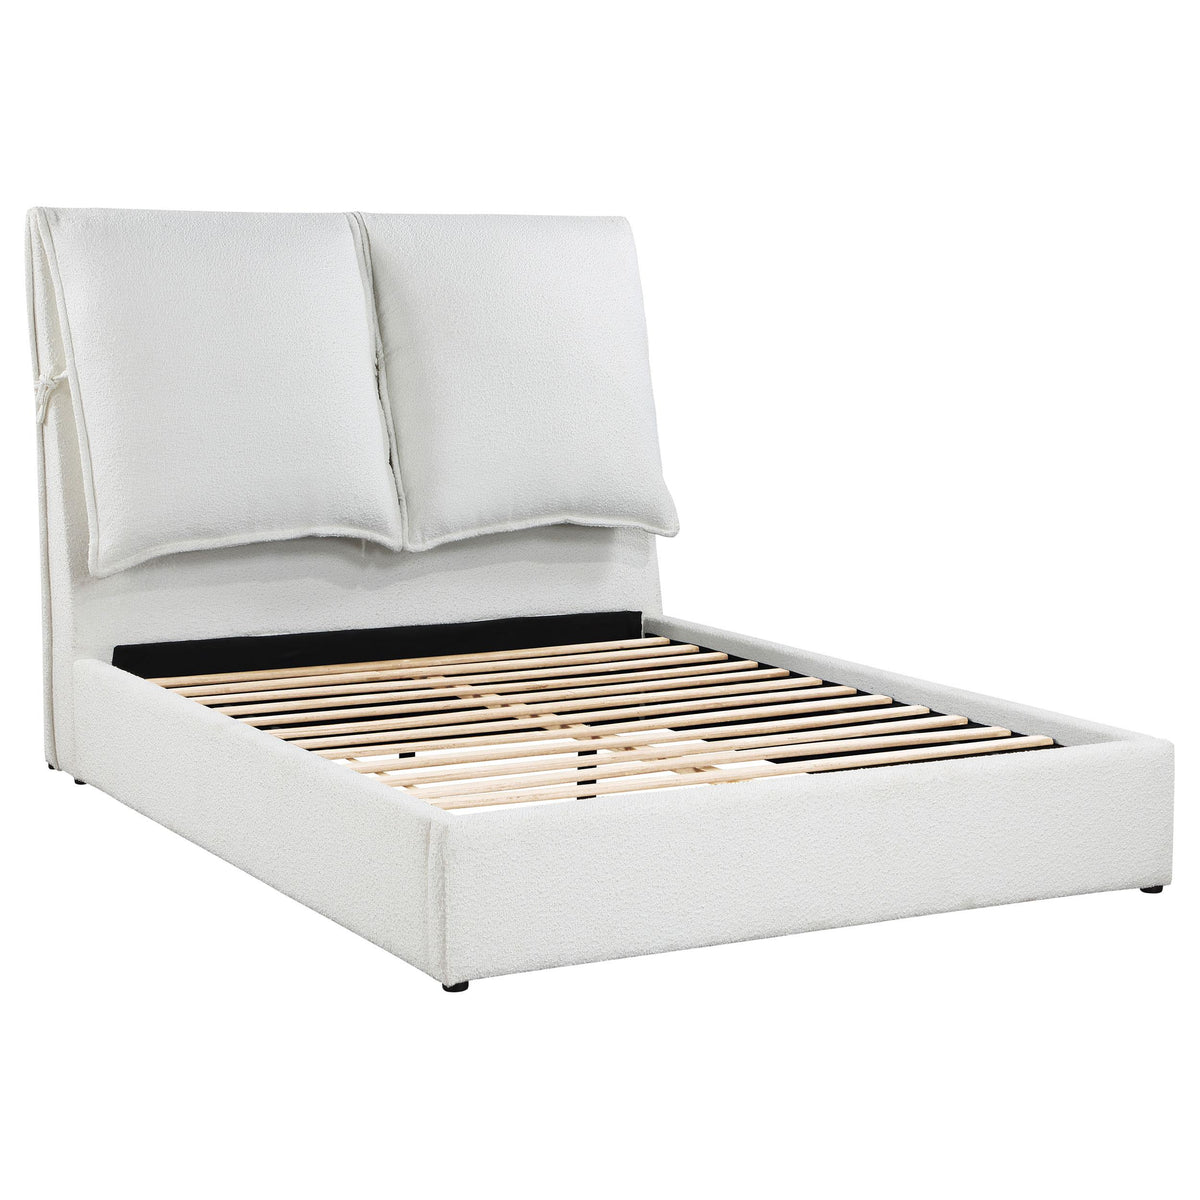 Gwendoline Upholstered Platform Bed with Pillow Headboard White  Las Vegas Furniture Stores